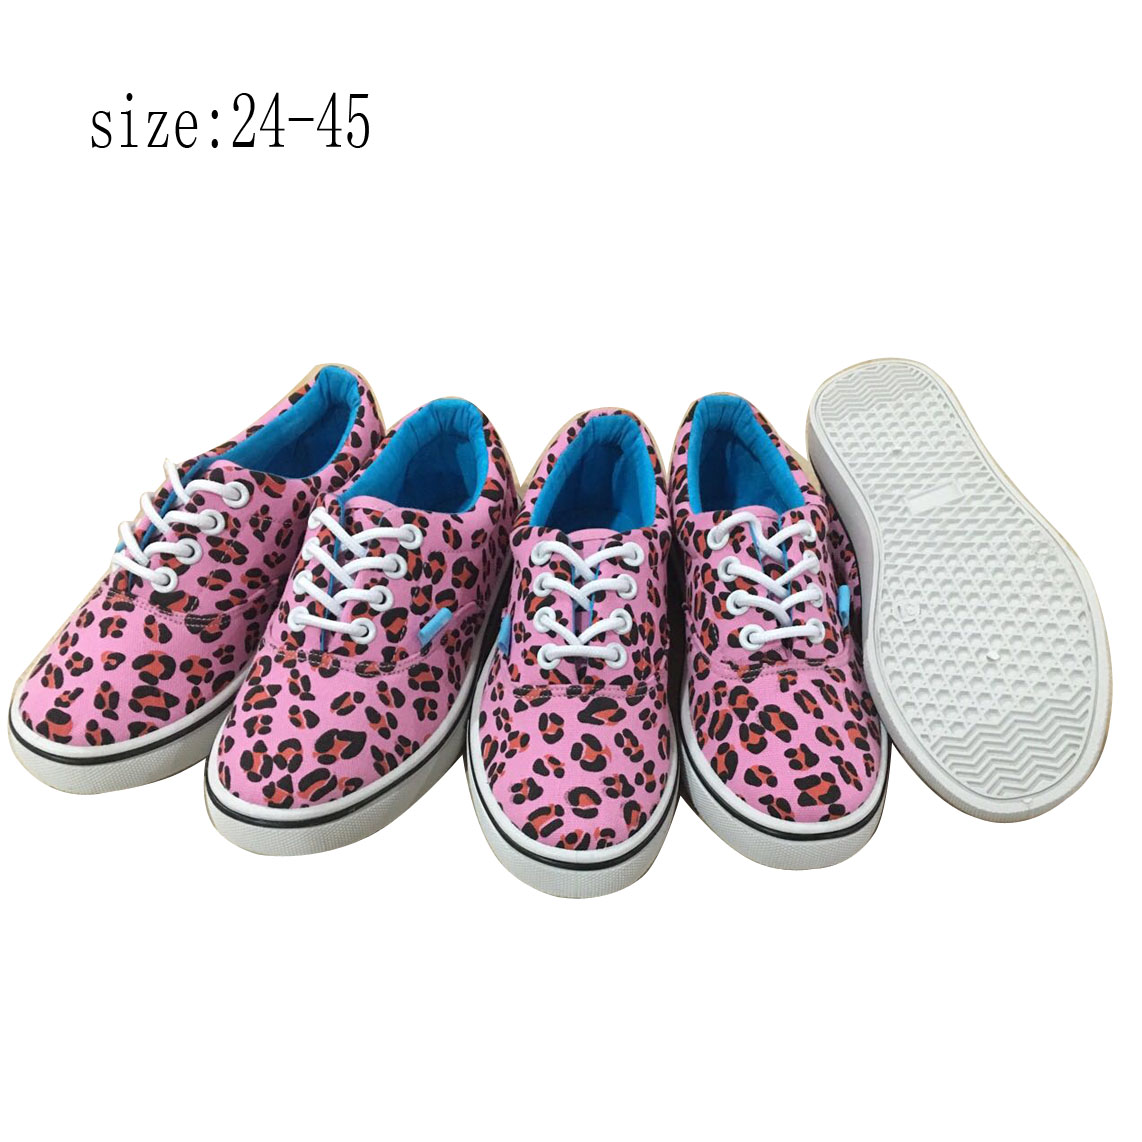 New design women casual shoes canvas shoes (HP19517-9) 1. ITEM...